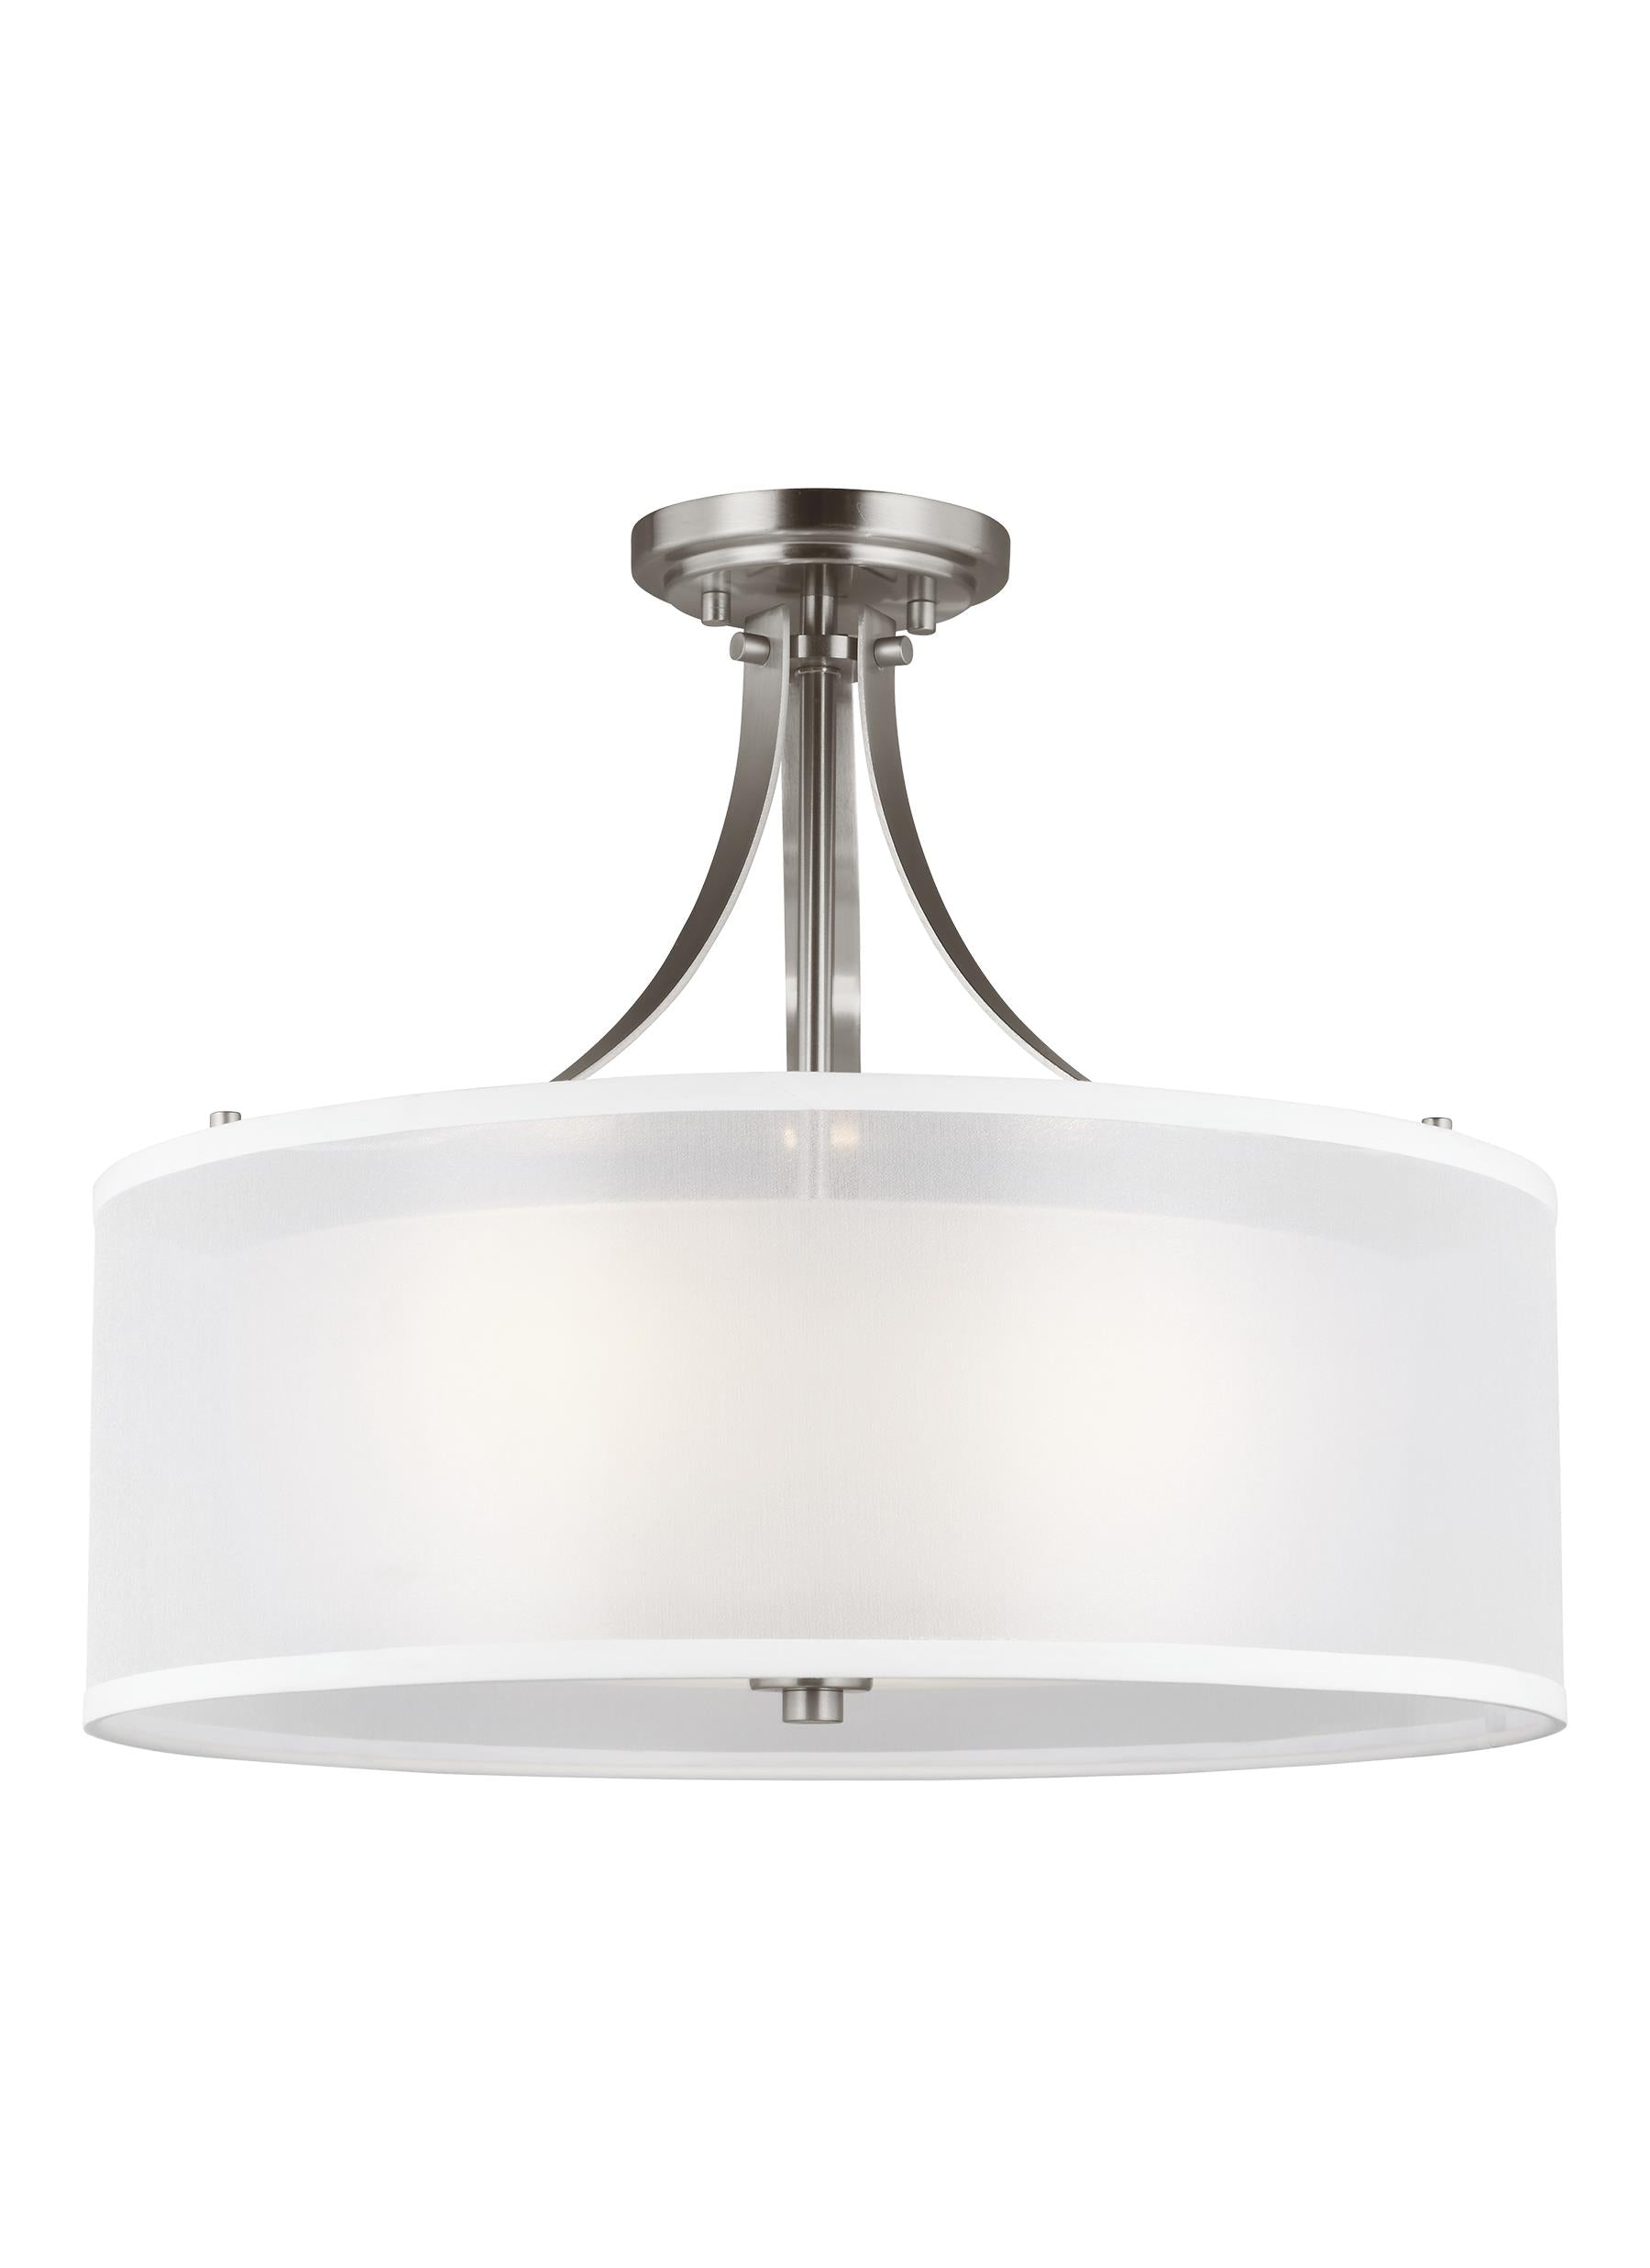 Elmwood Park traditional 3-light indoor dimmable ceiling semi-flush mount in brushed nickel silver finish with satin etche...